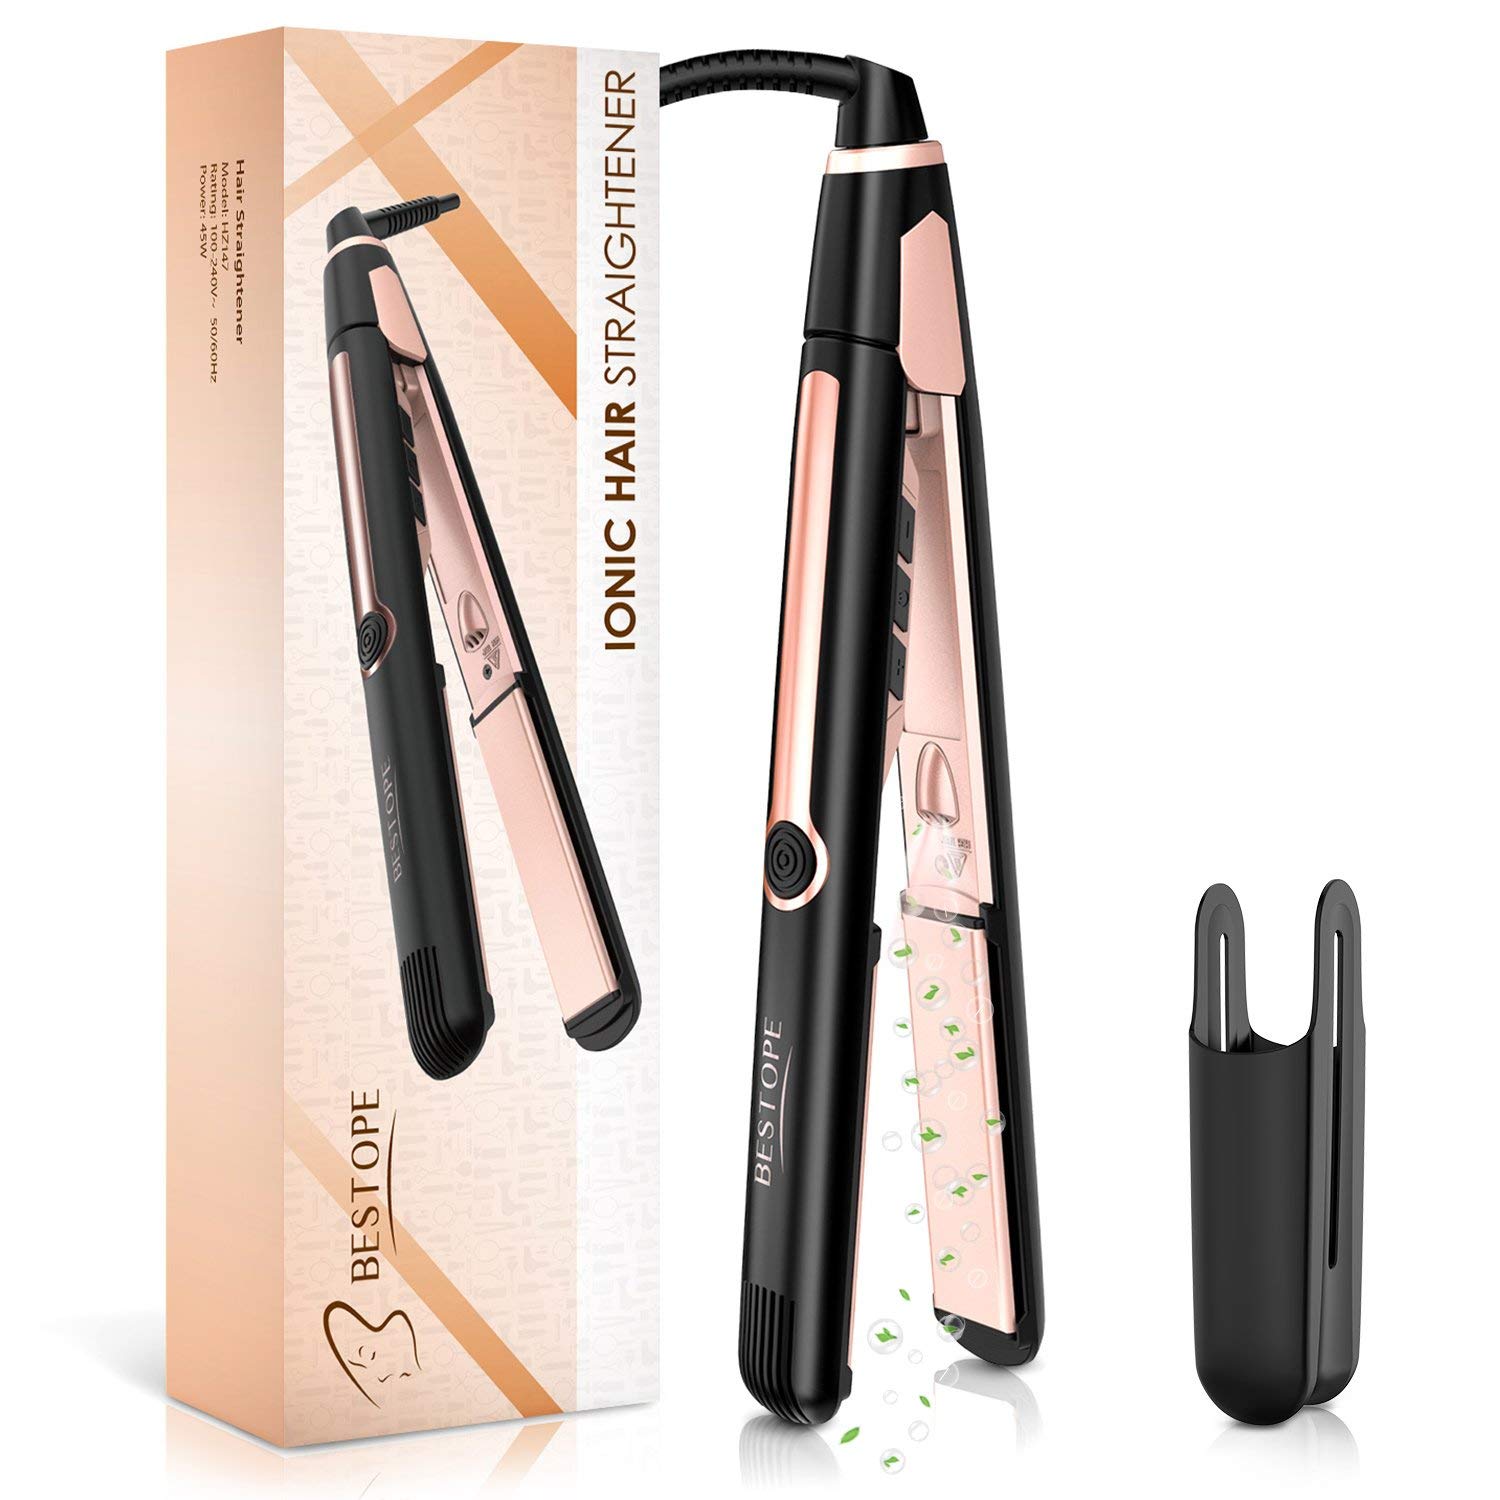 Hair straightener flat iron with digital LCD display dual voltage